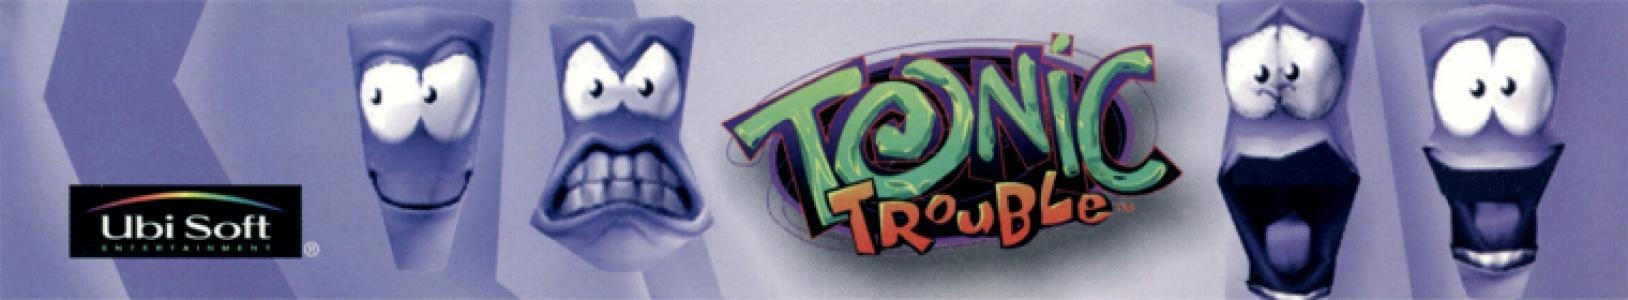 Tonic Trouble banner